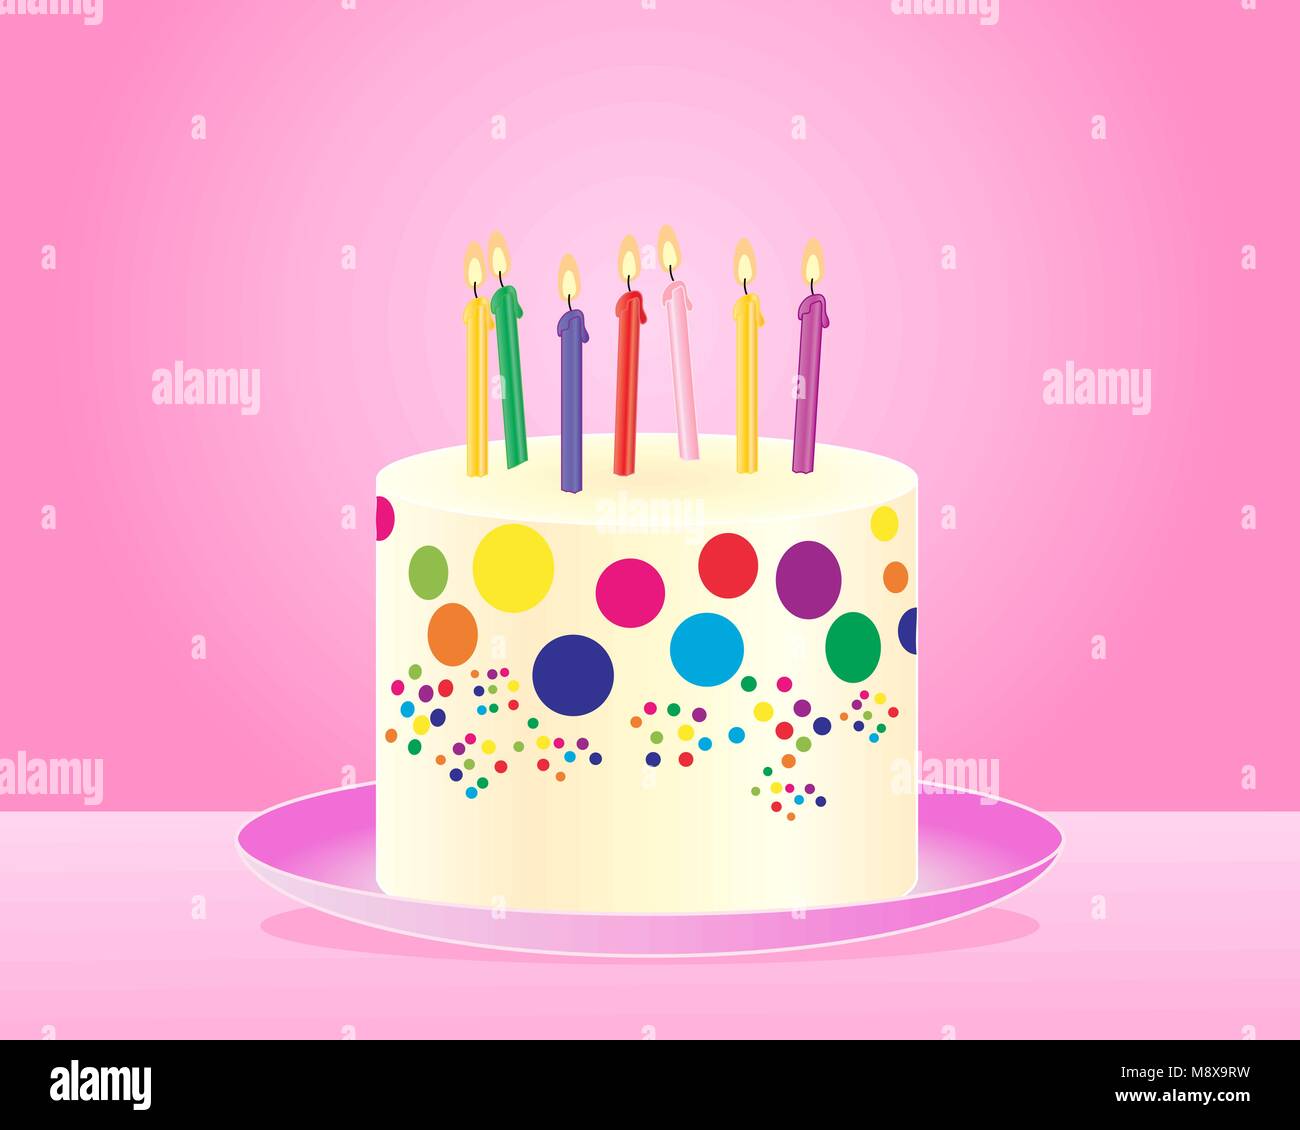 a vector illustration in eps 10 format of a classic colorful birthday cake with candles and cream frosting on a pink plate and background Stock Vector